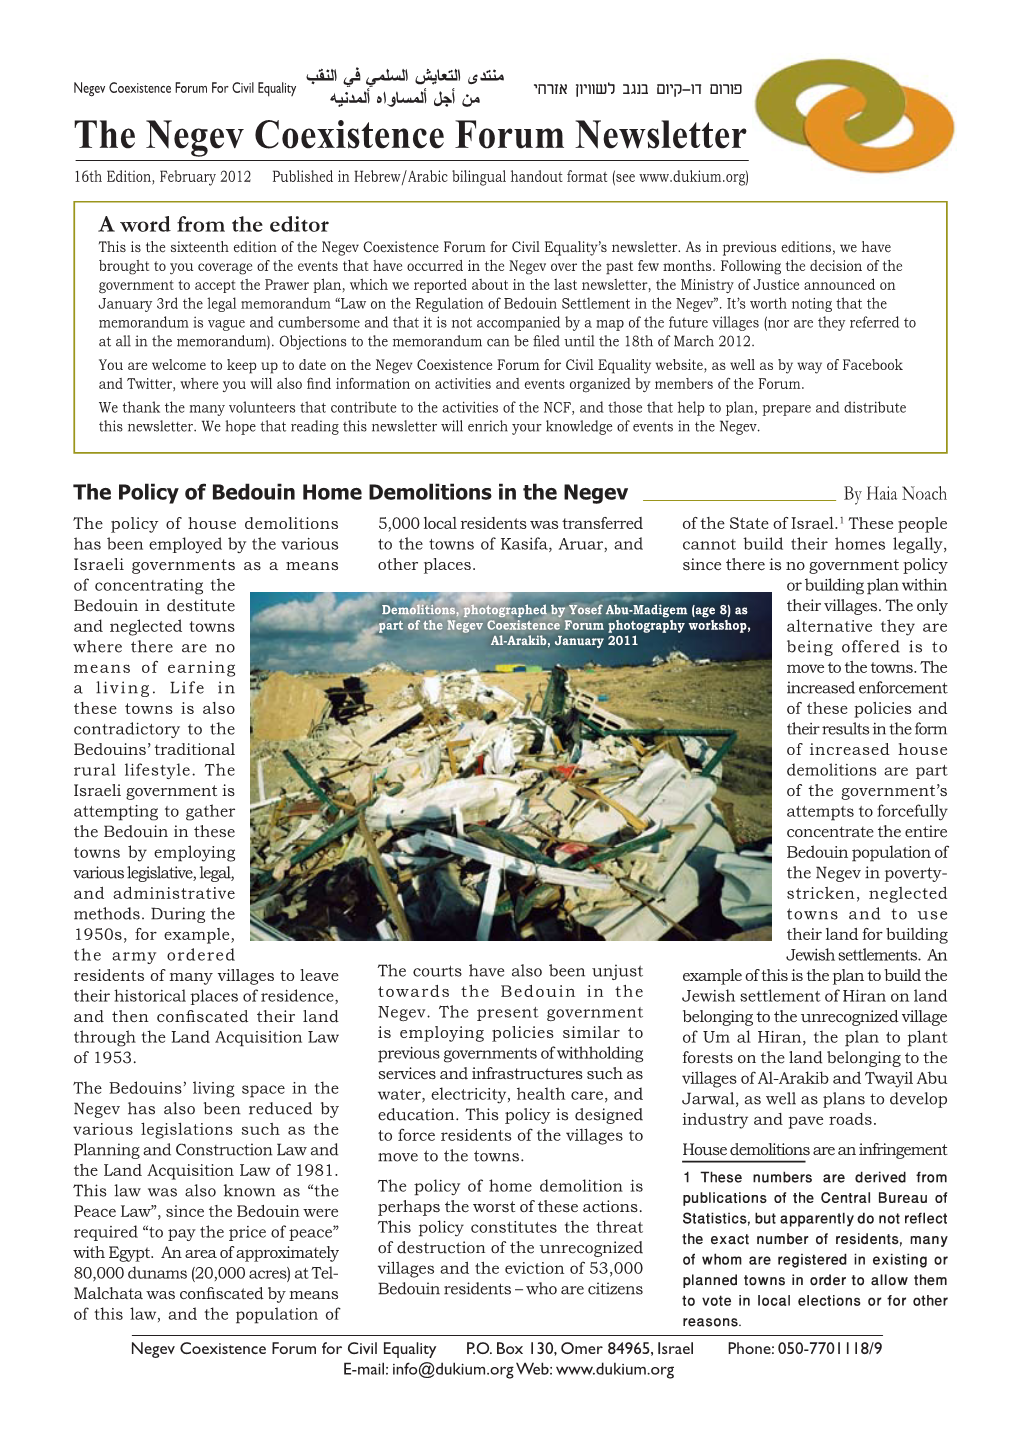 The Negev Coexistence Forum Newsletter 16Th Edition, February 2012 Published in Hebrew/Arabic Bilingual Handout Format (See